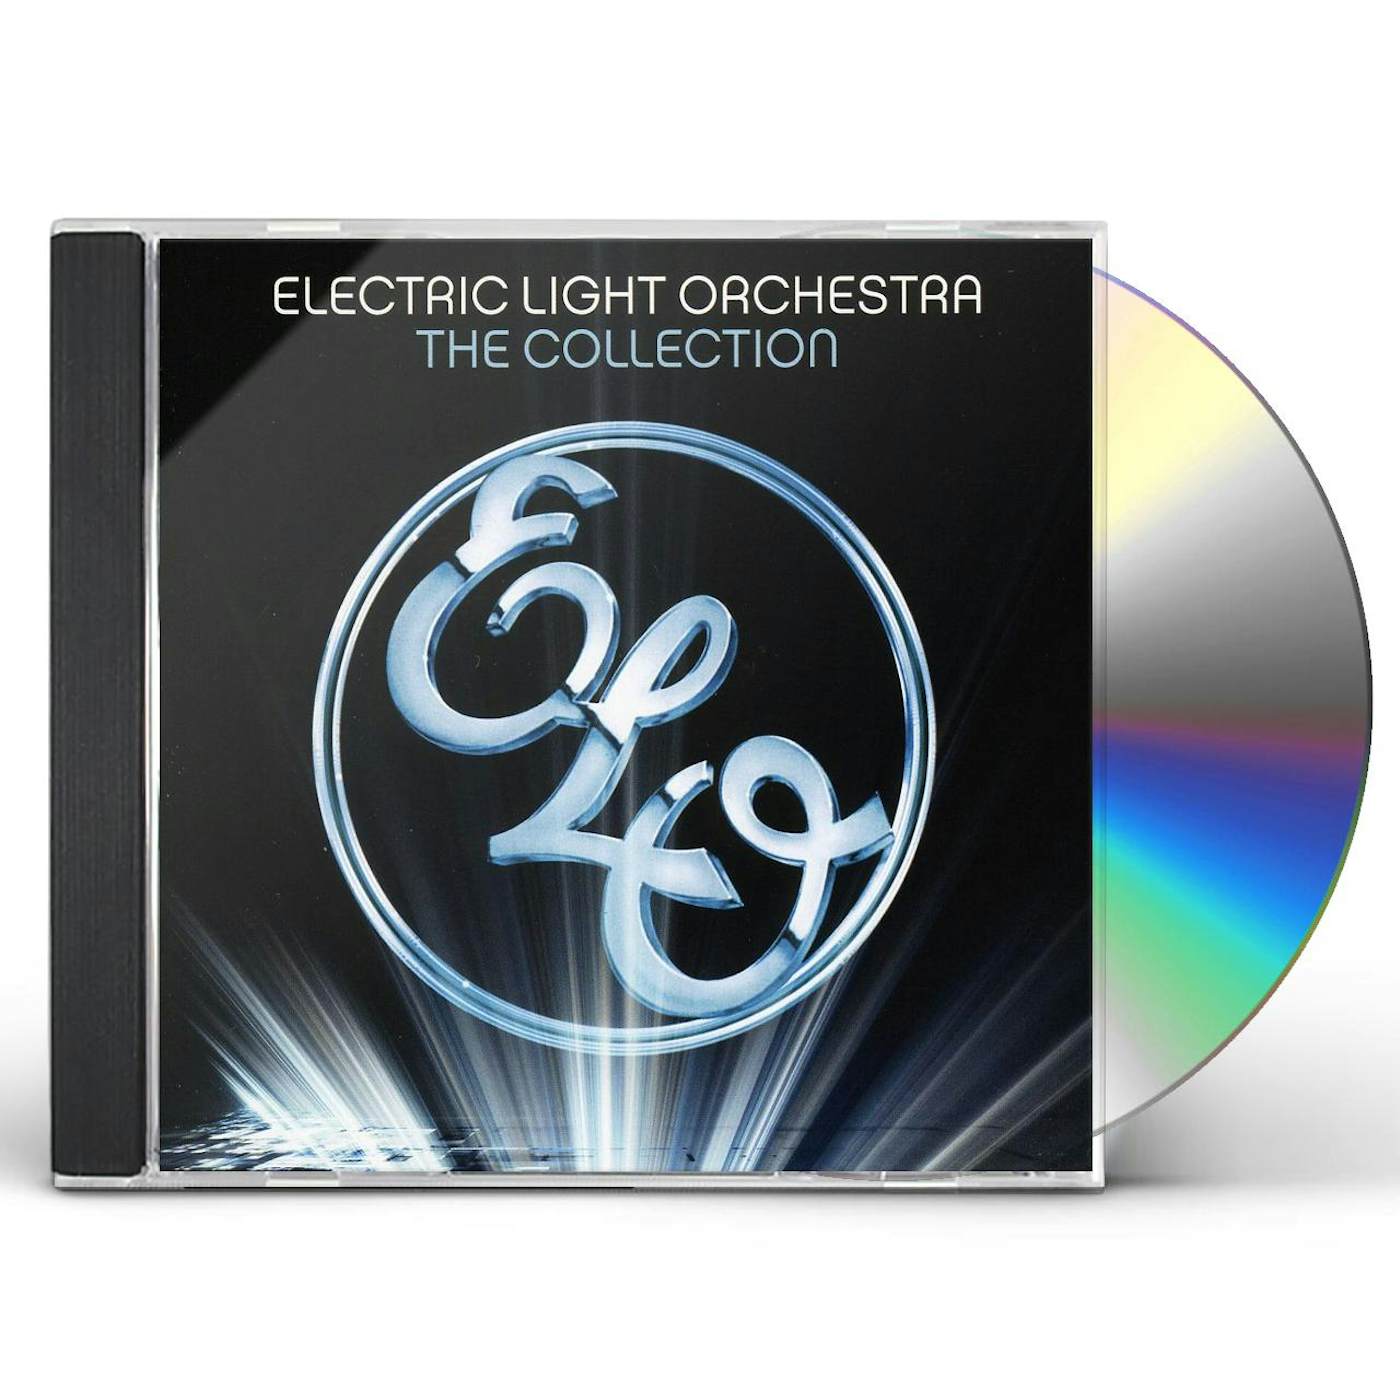 ELO (Electric Light Orchestra) COLLECTION CD